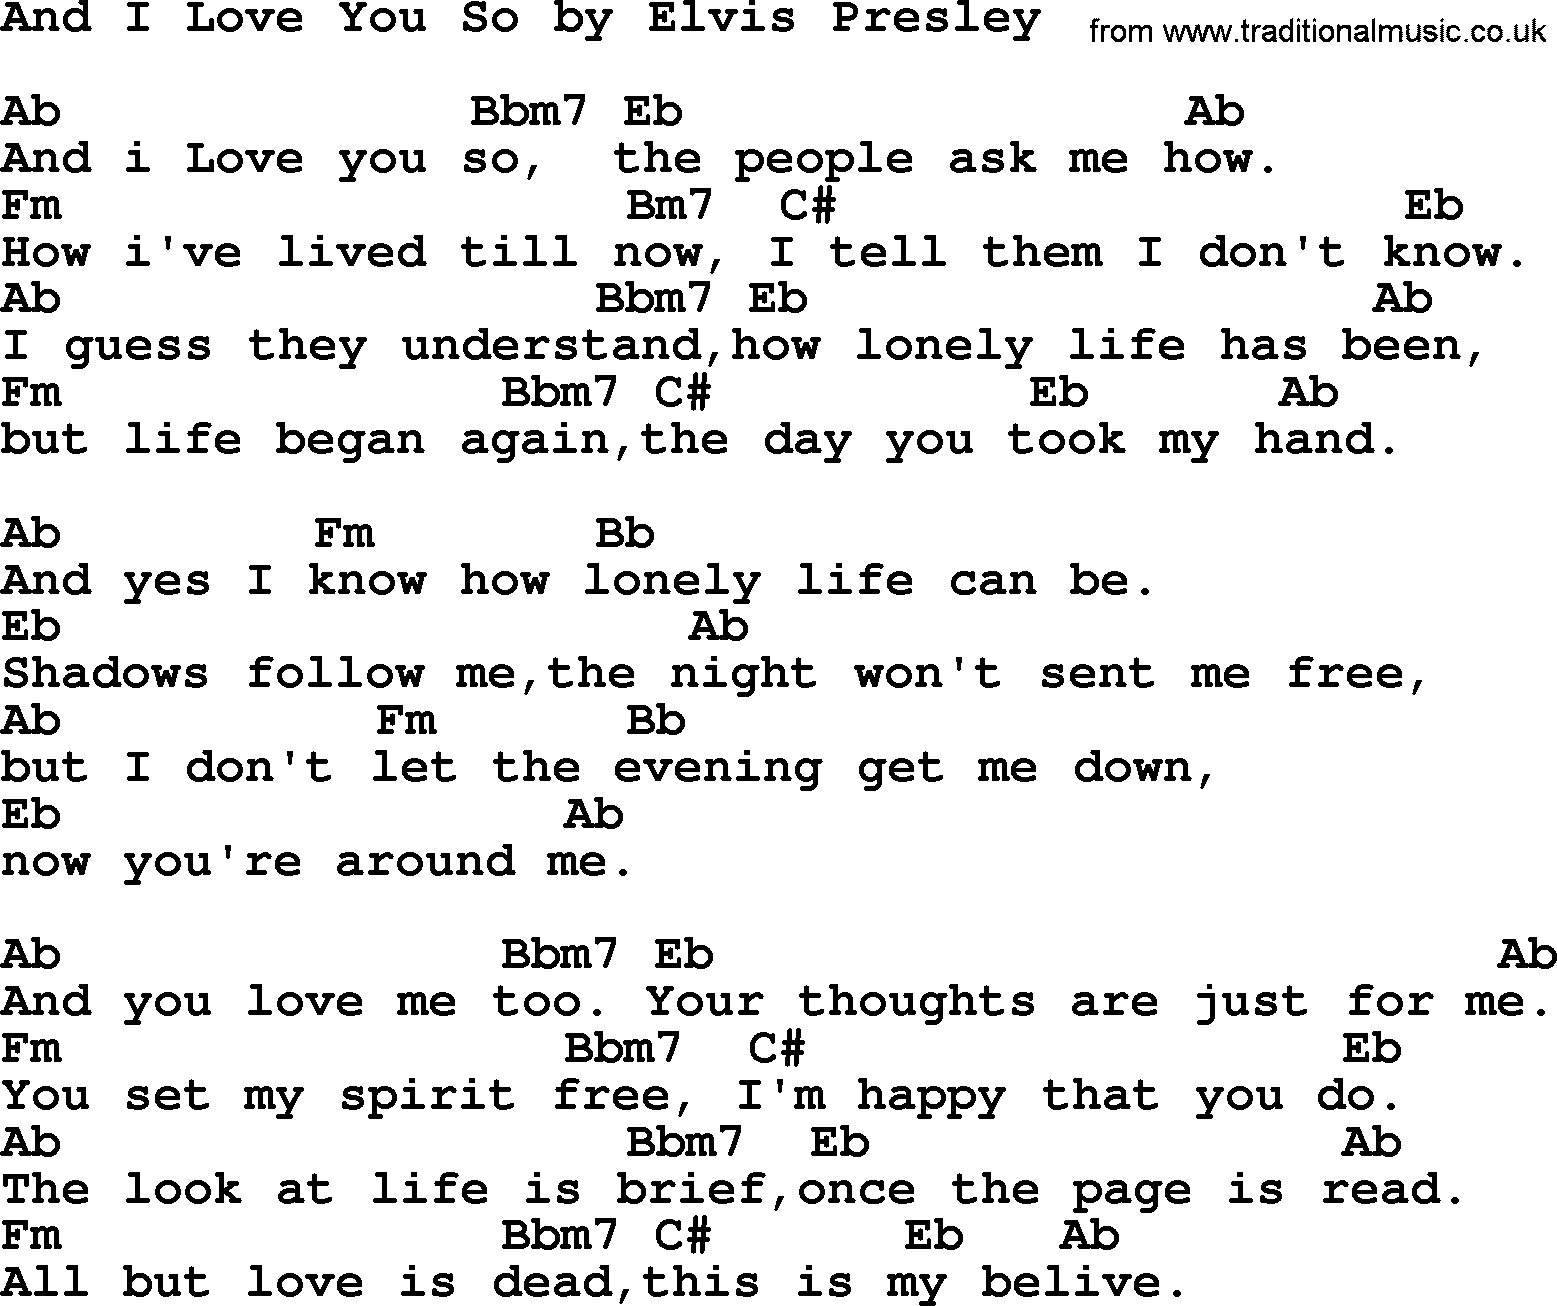 Elvis Presley song: And I Love You So, lyrics and chords